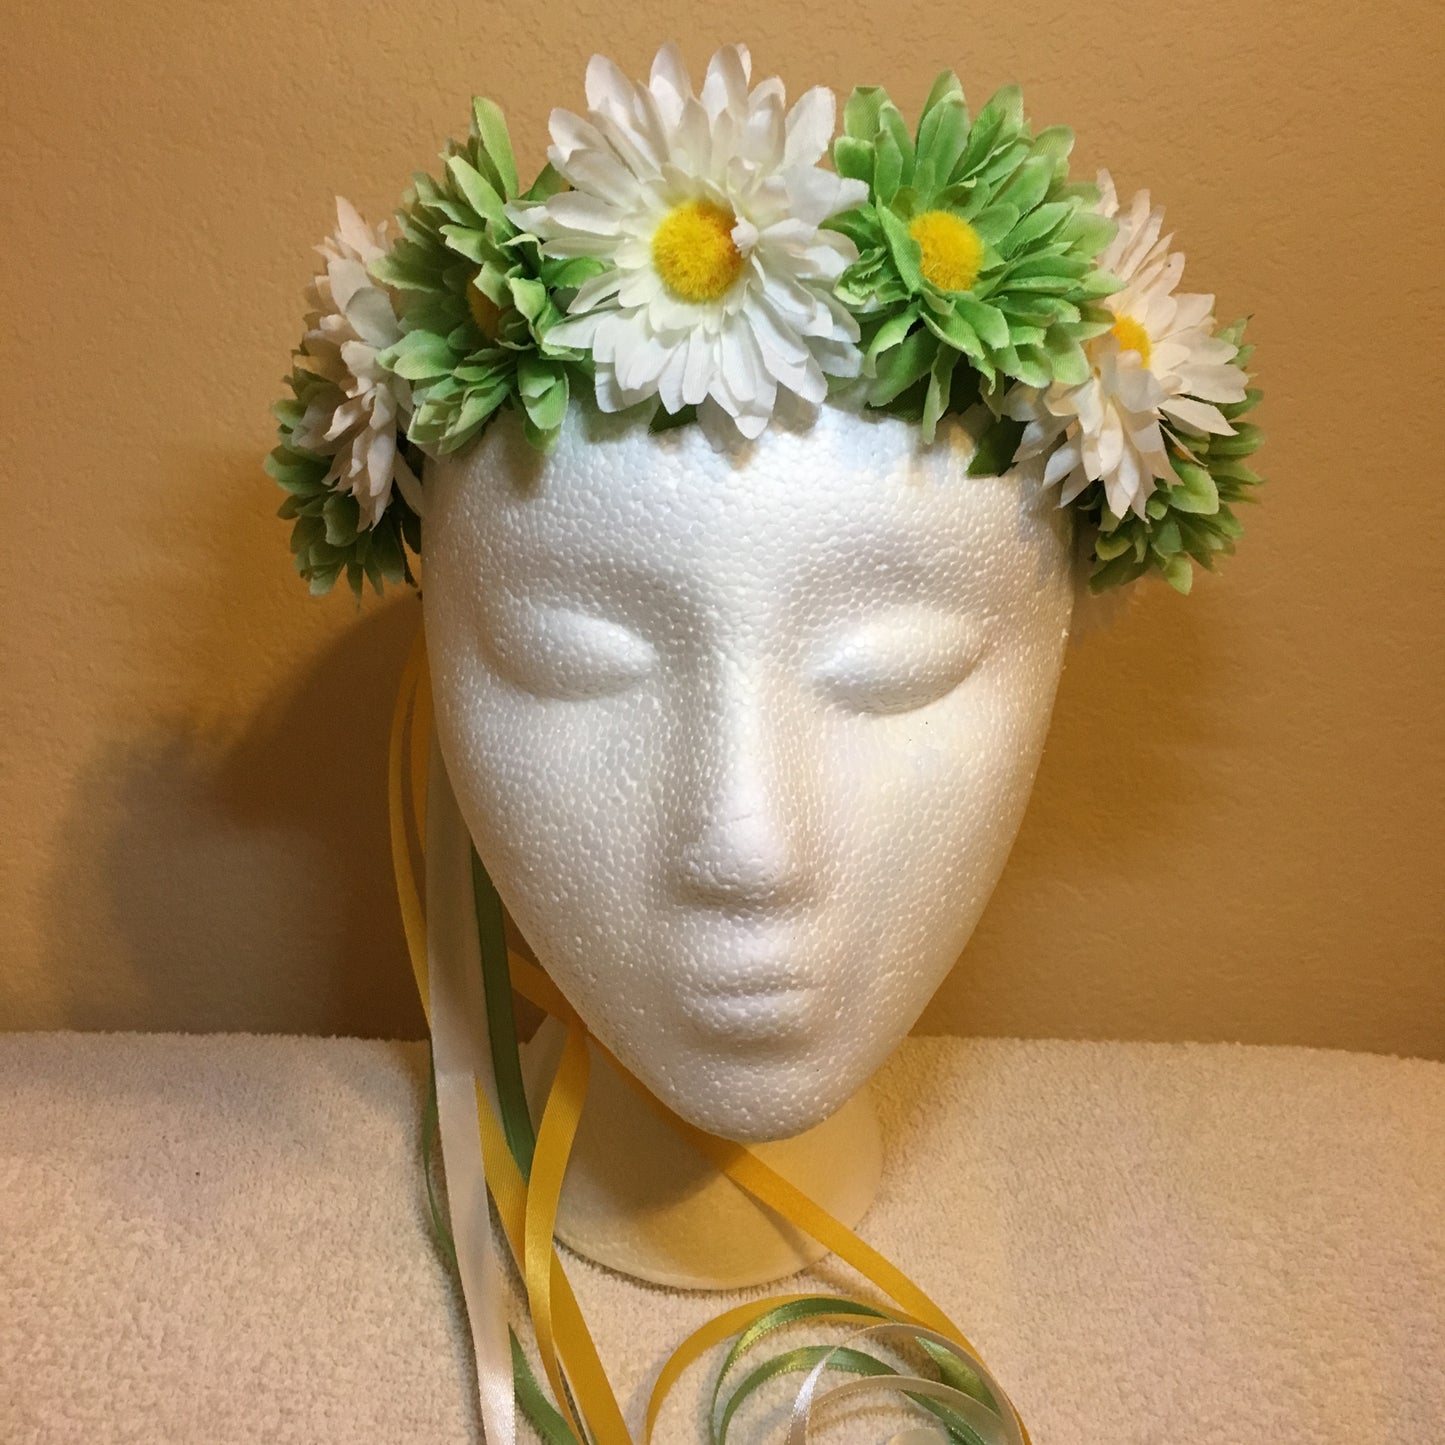 Small Wreath - Every other green & white daisies (2)